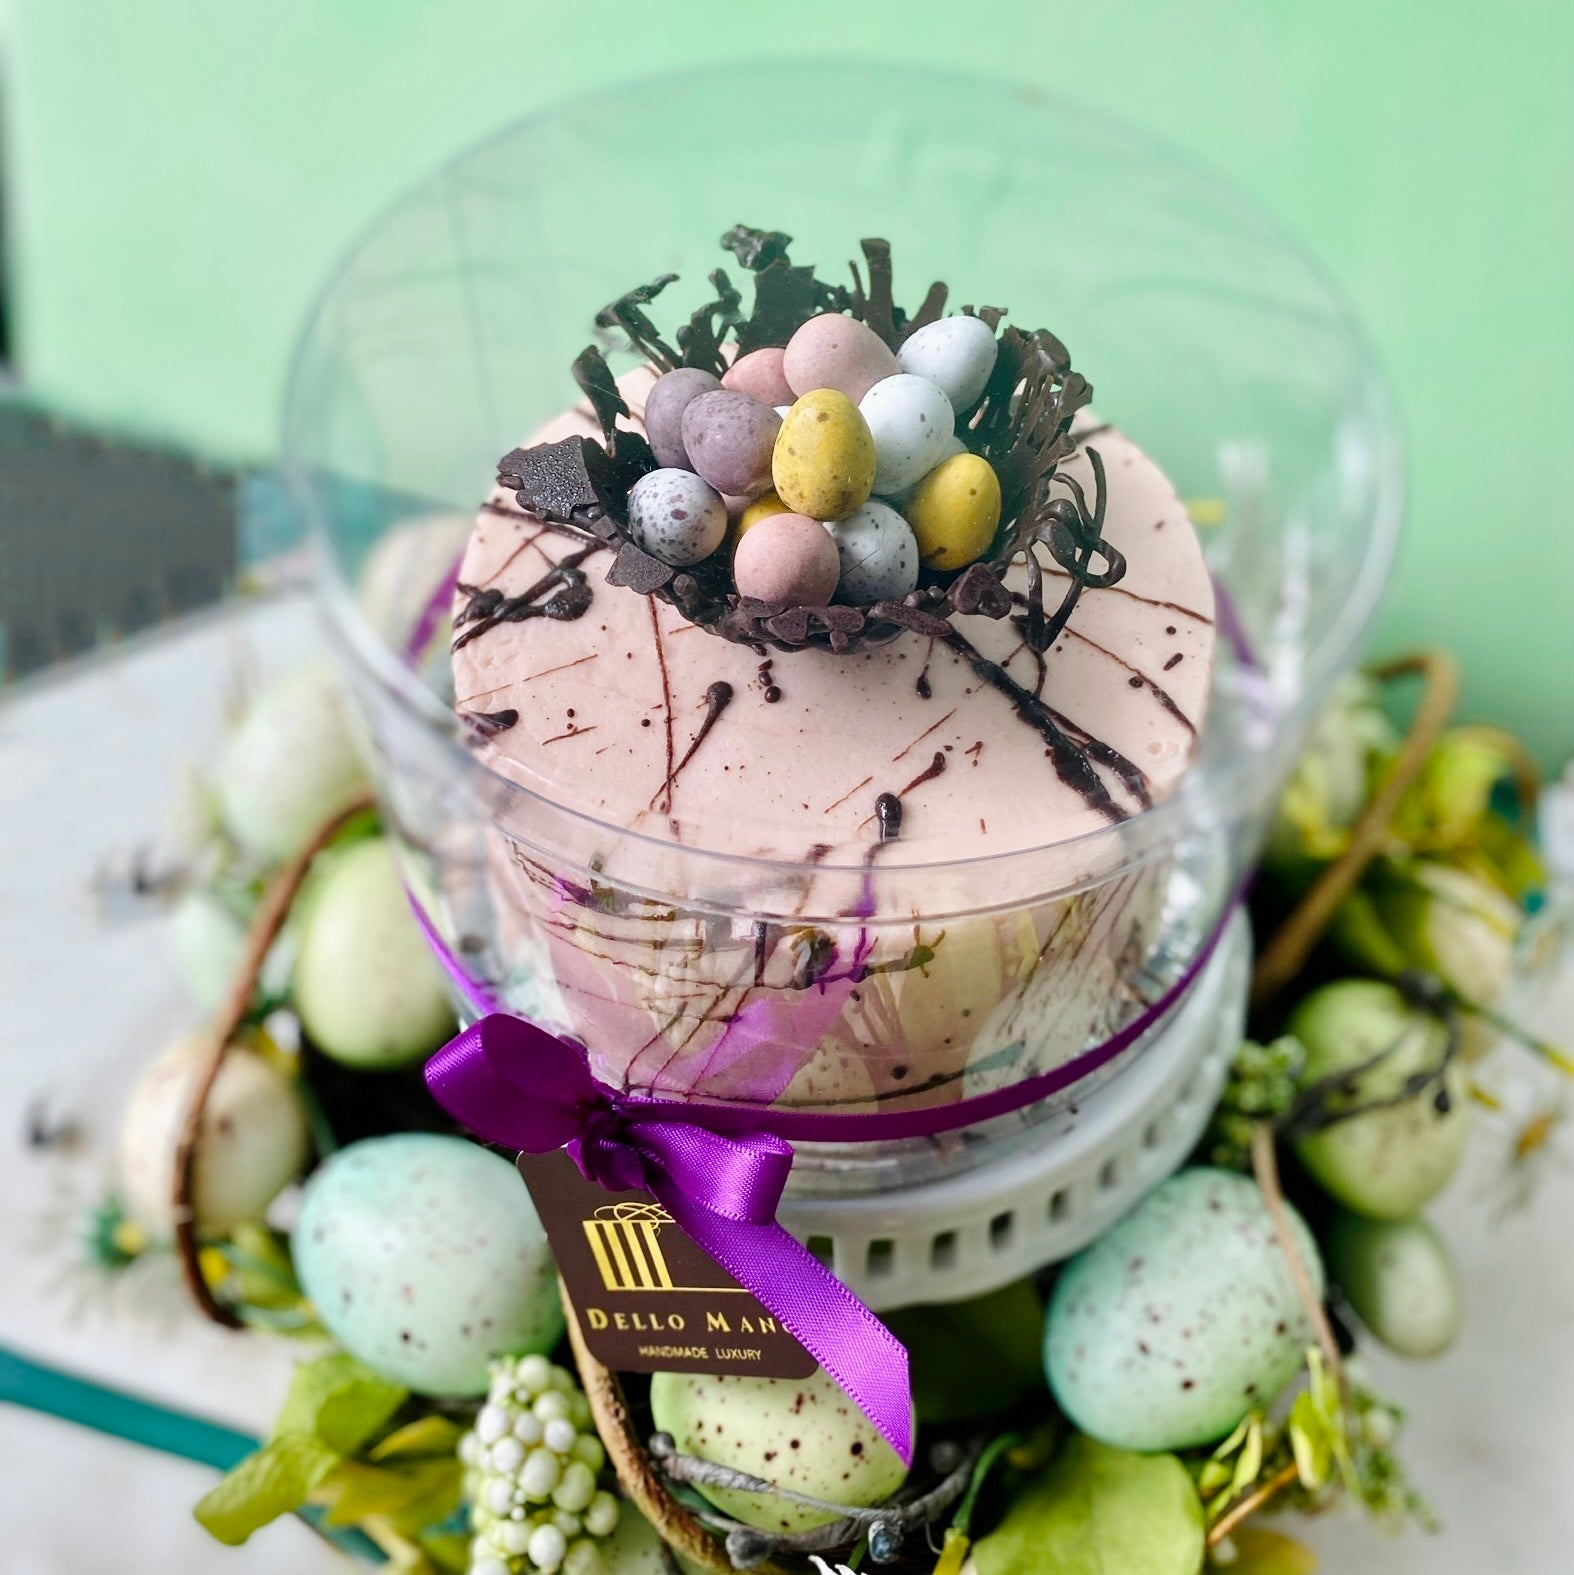 An Easter Cake with pink frosting and speckled chocolate. On top of the cake is a chocolate nest filled with Easter egg.